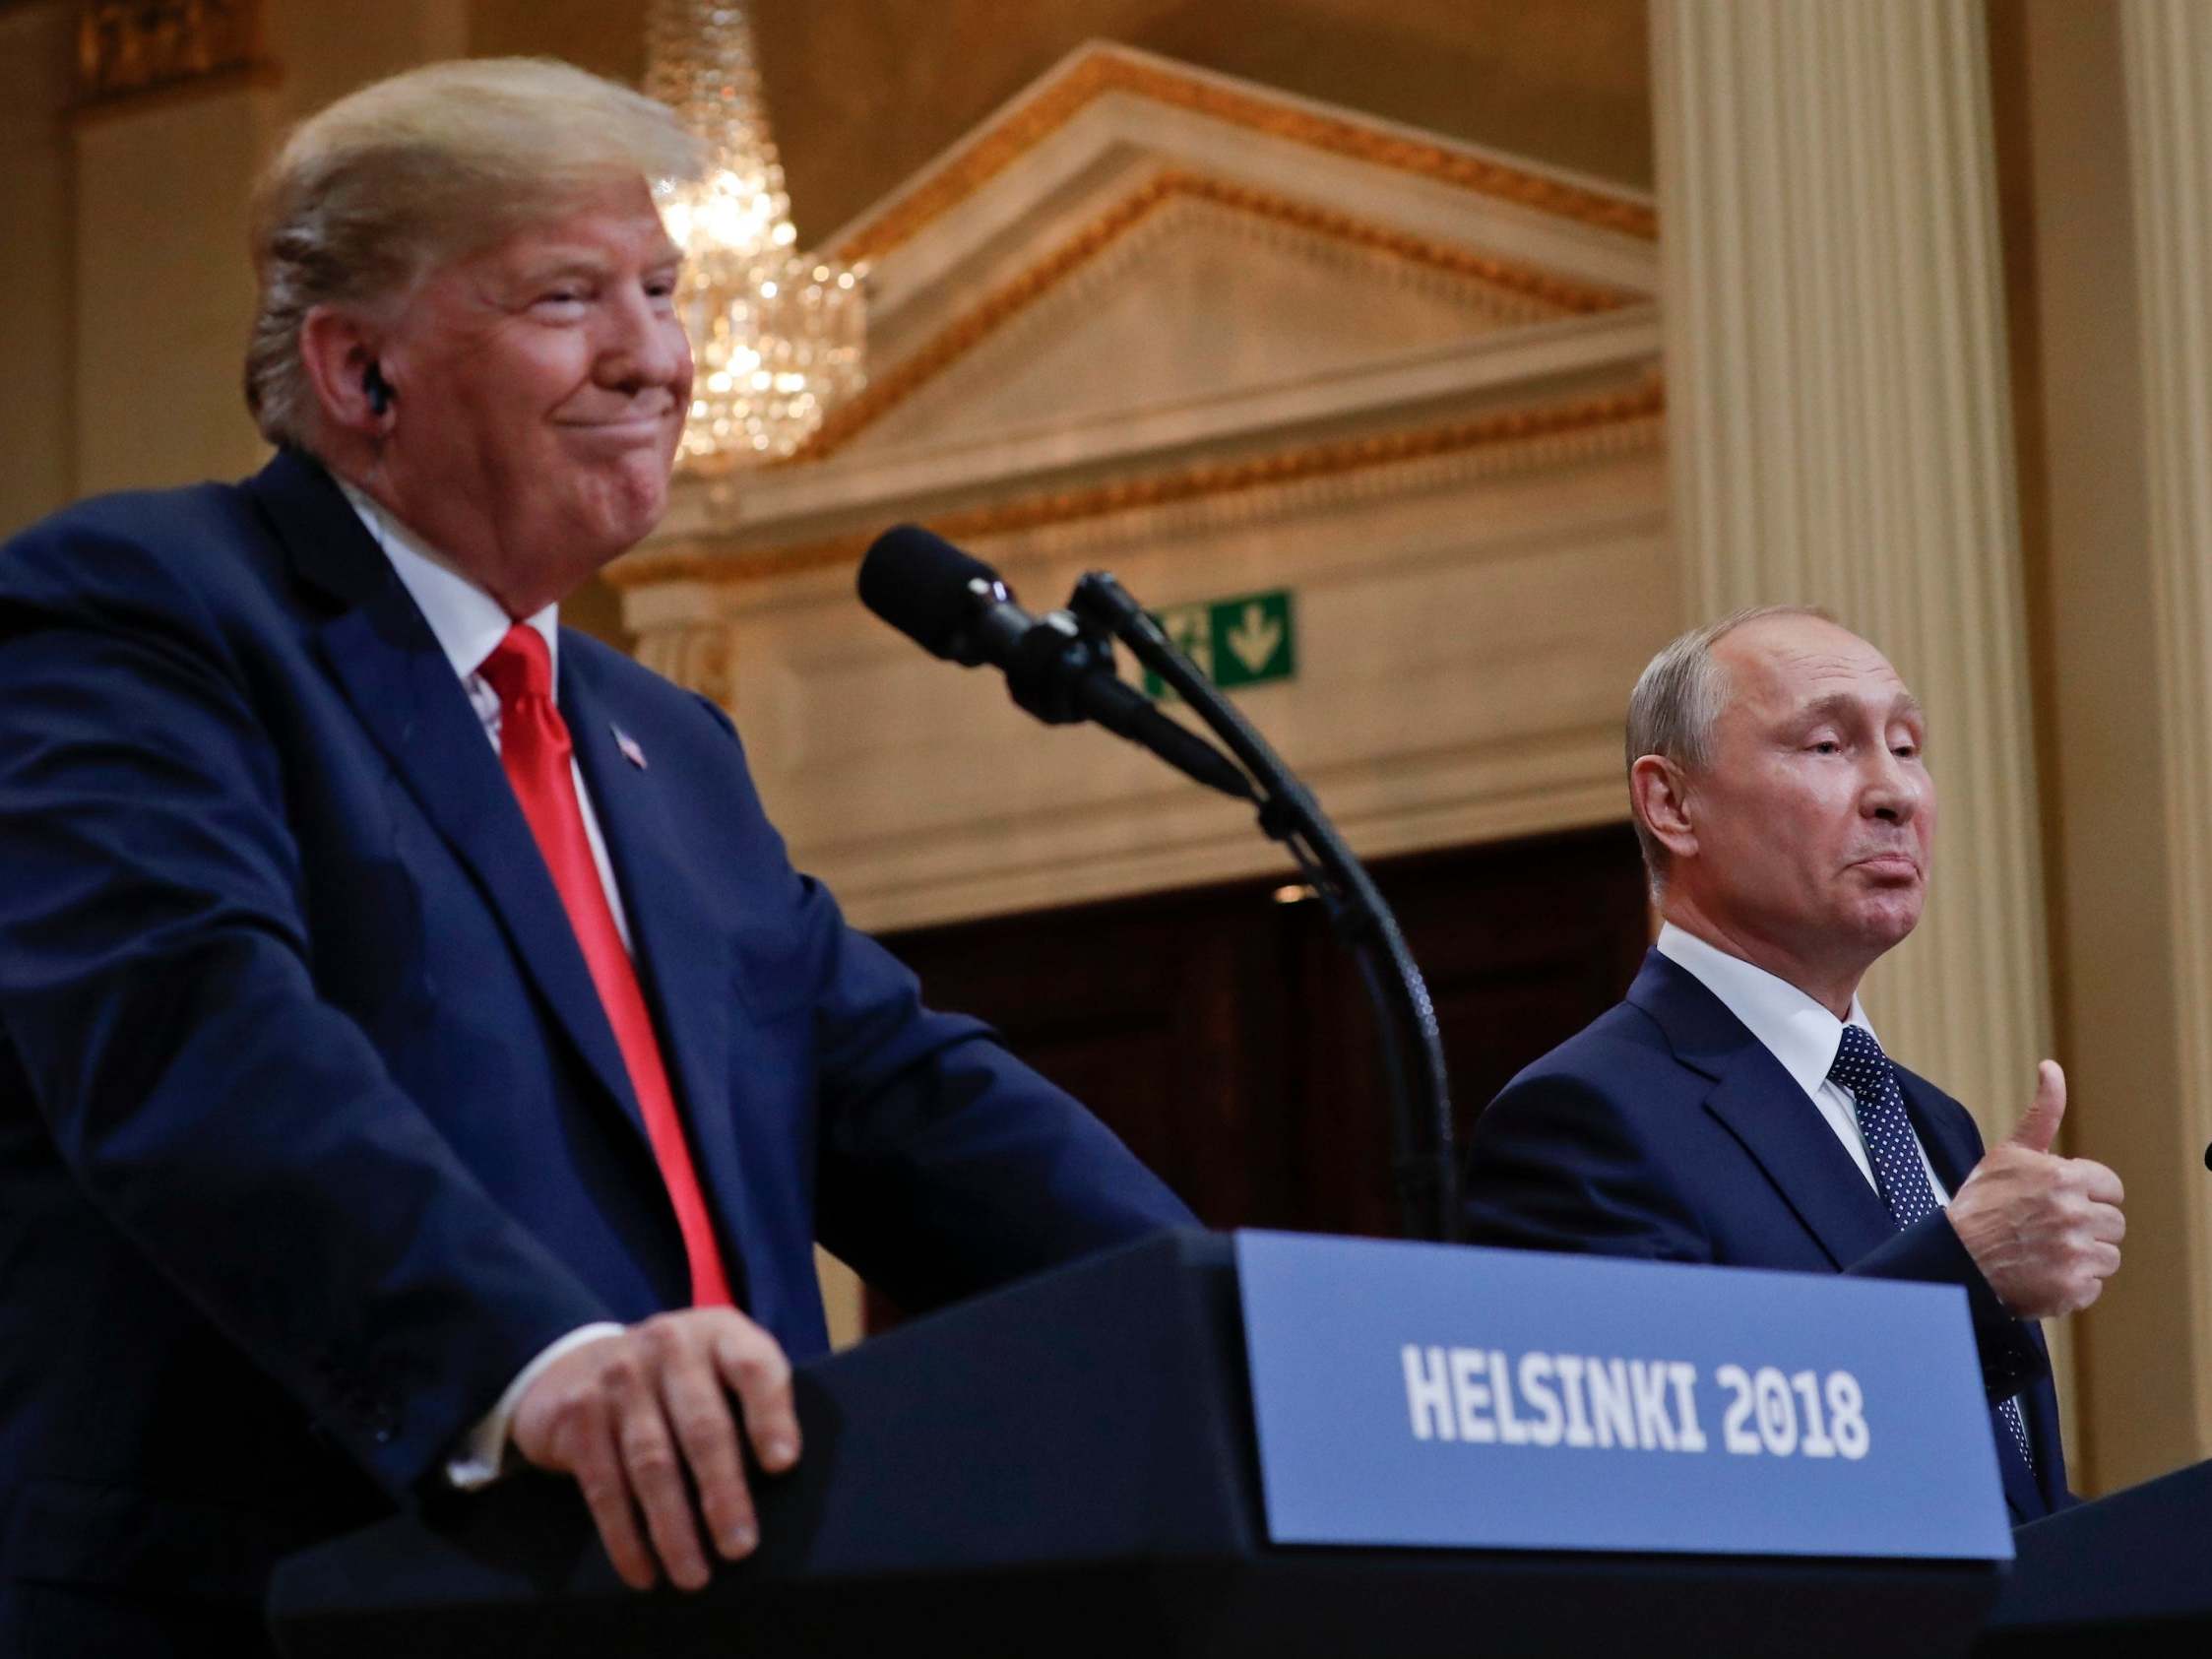 Trump speaks to Putin for first time since Russian 'bounty' revelations – but apparently fails to mention it